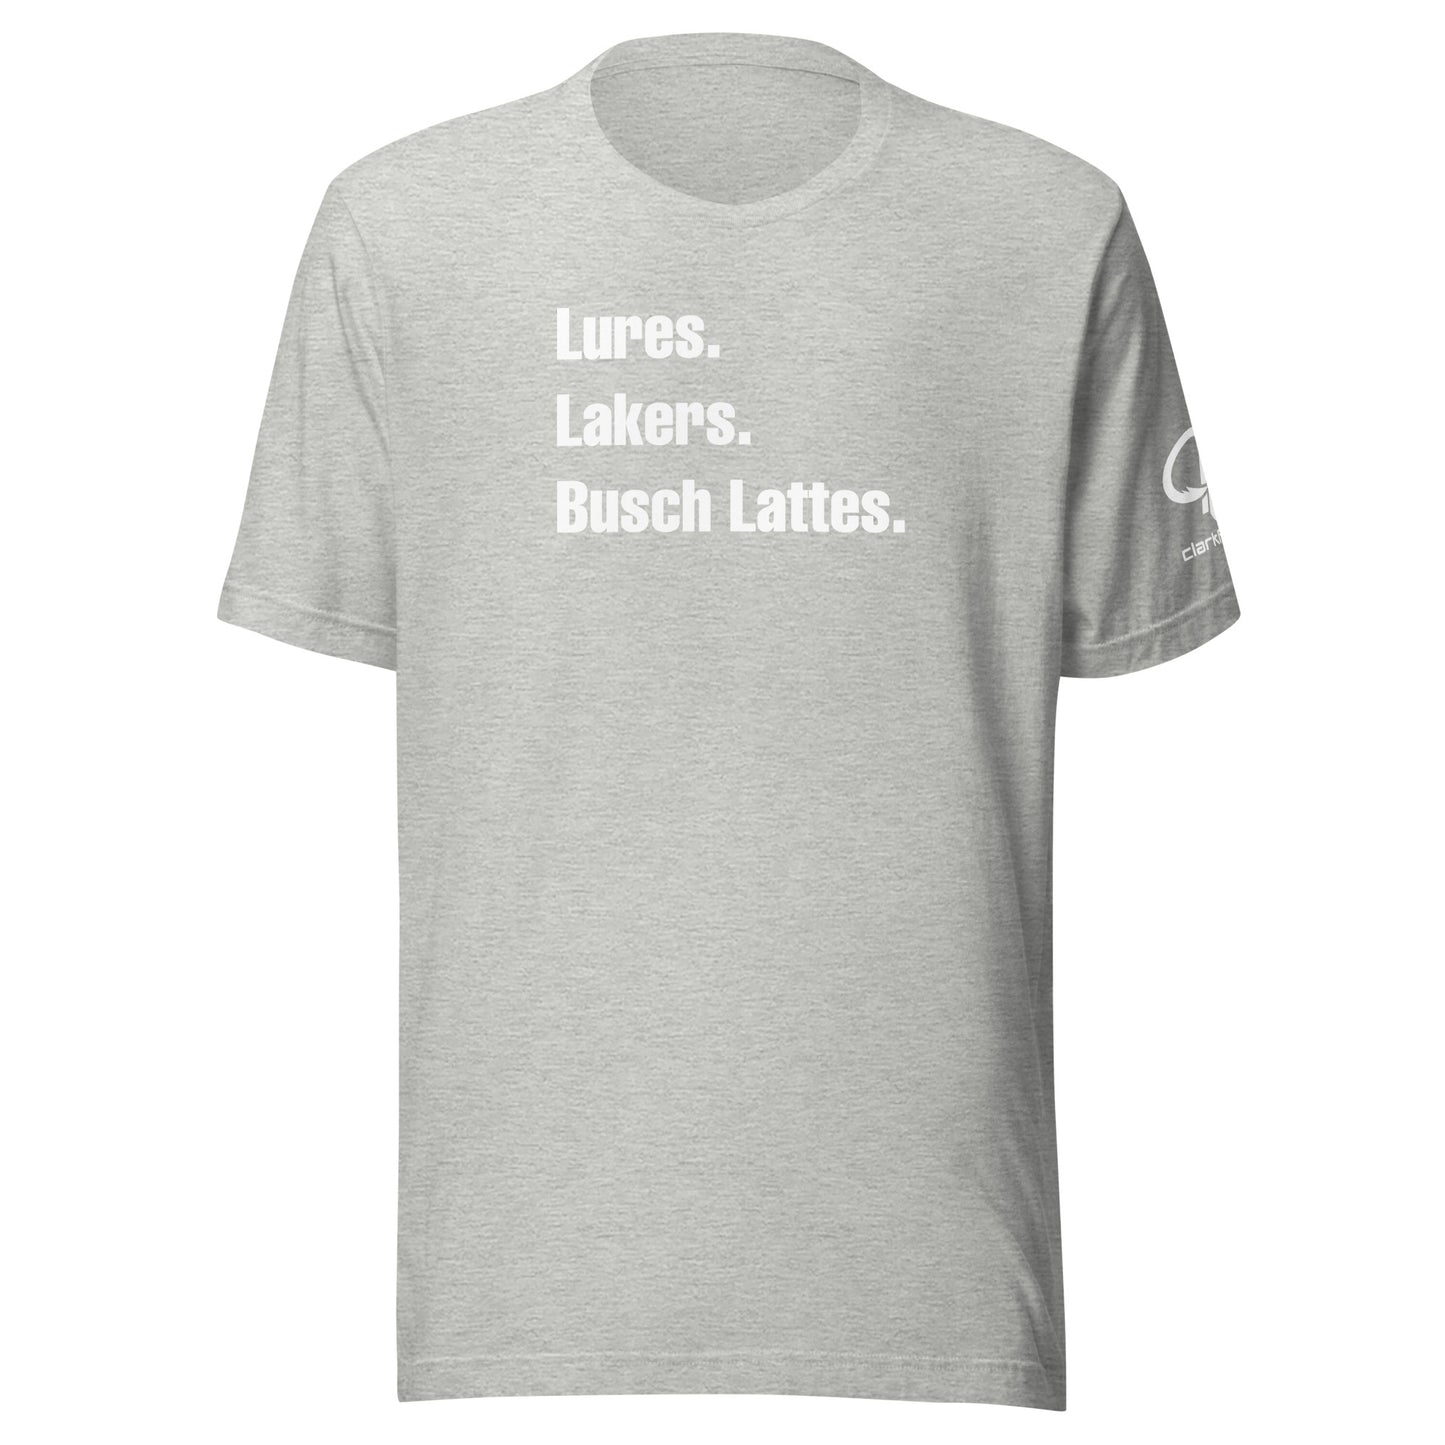 Lures. Lakers. Busch Lattes. CFC Tee